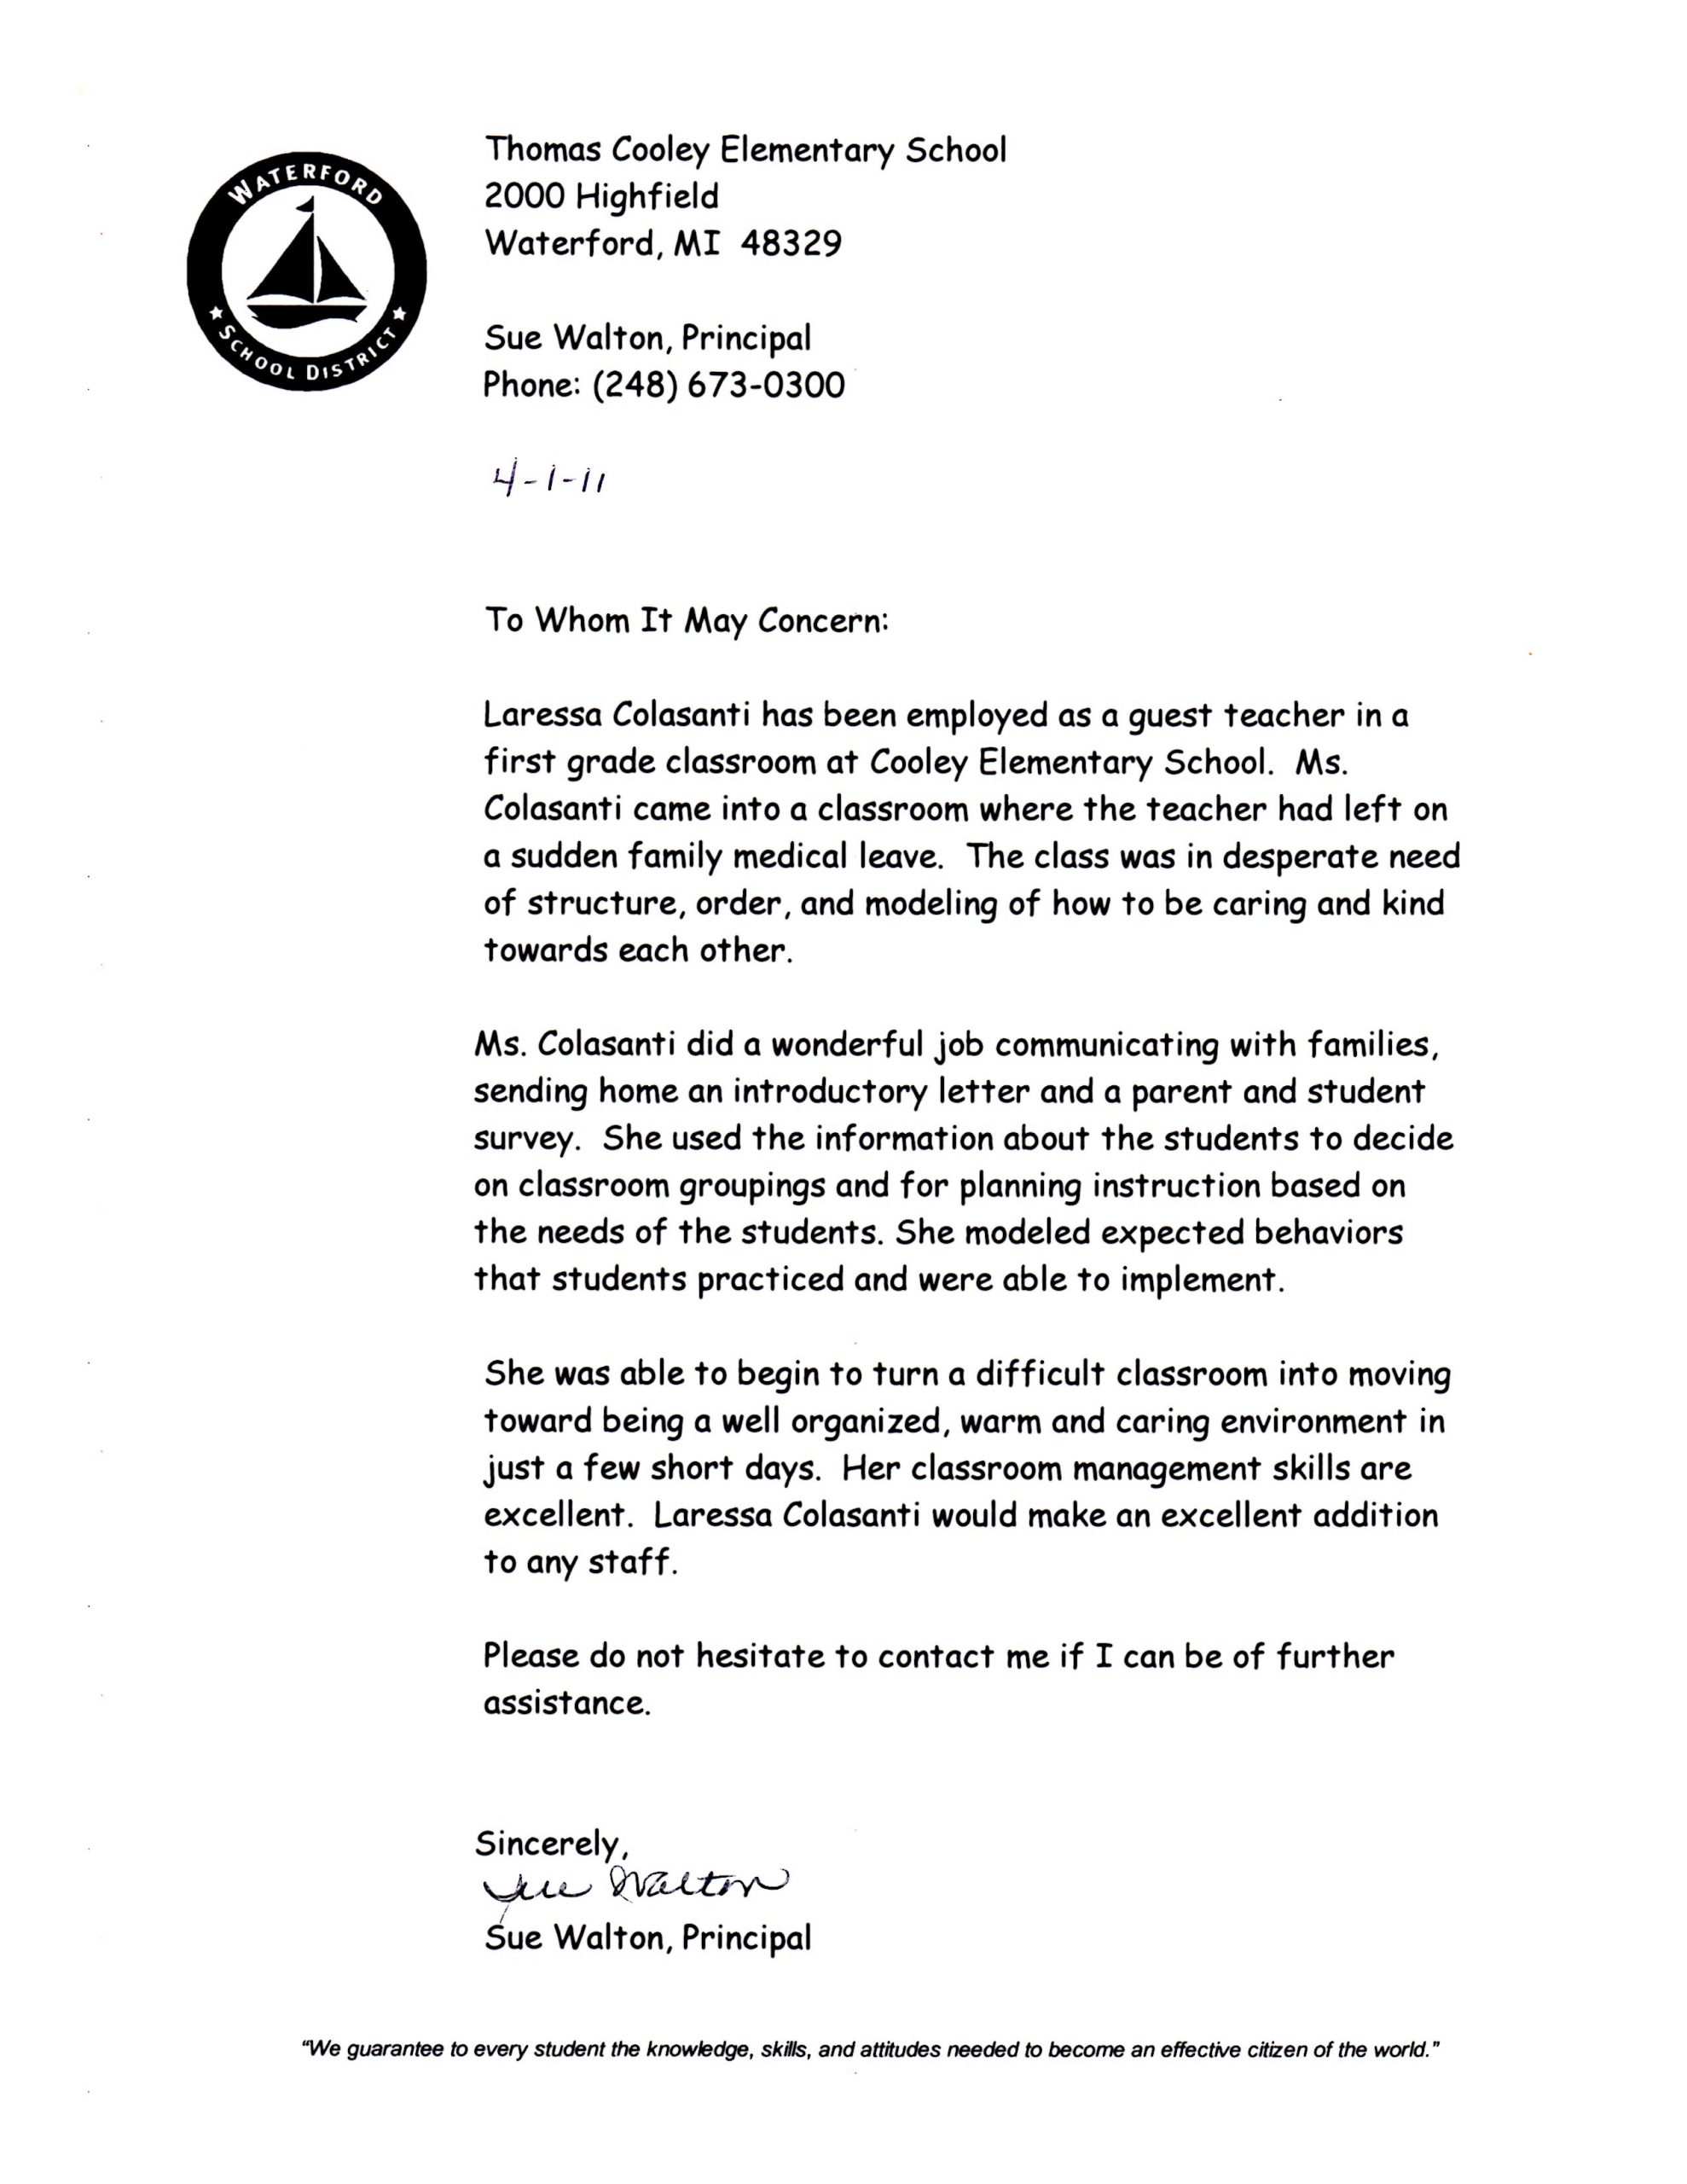 Letter Of Recommendation From Principal For Student Debandje pertaining to dimensions 2550 X 3300